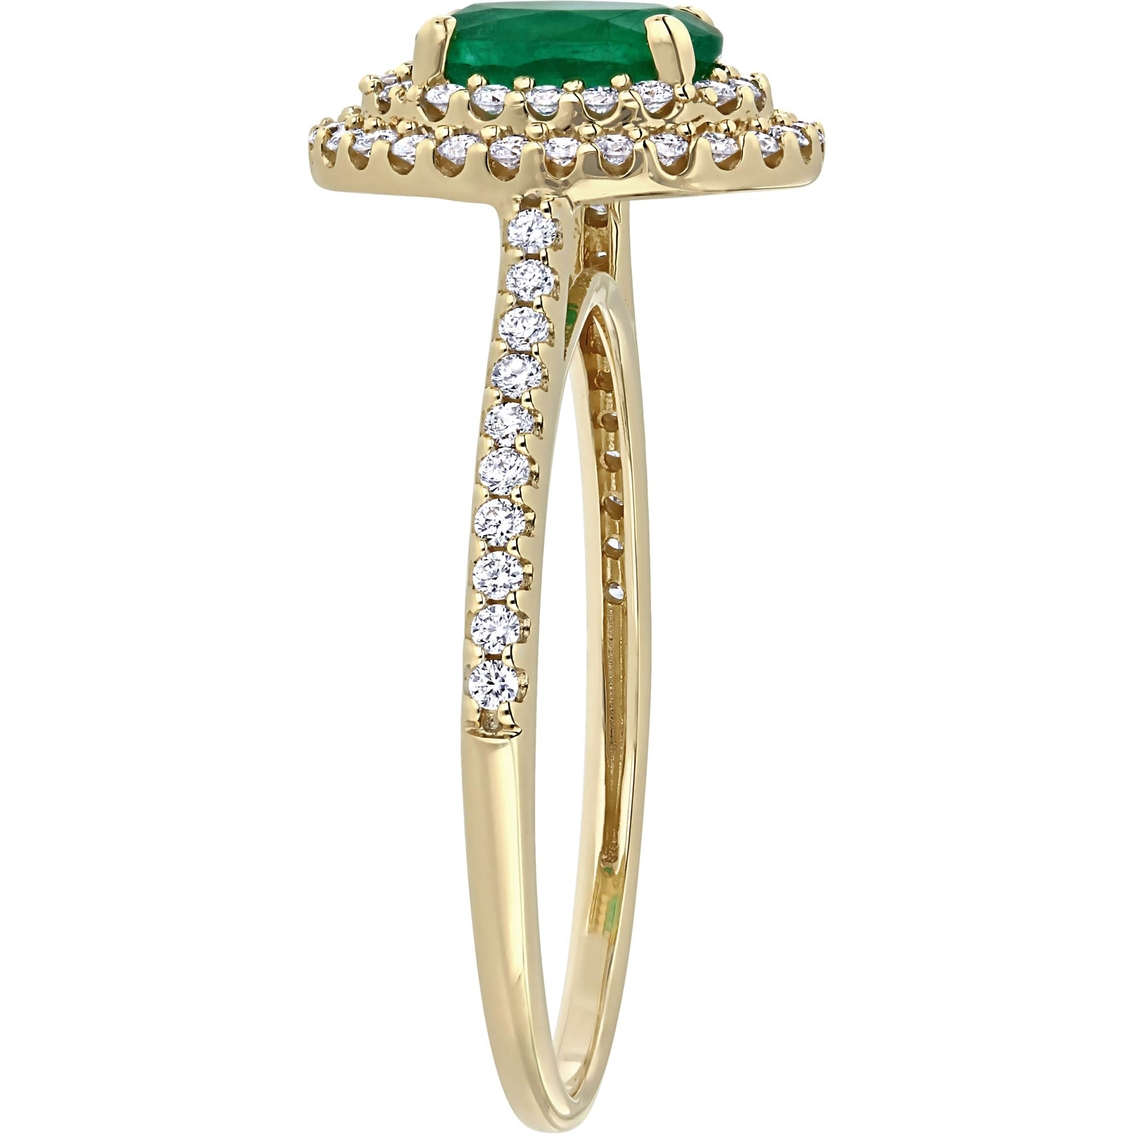 Sofia B. 14K Yellow Gold Oval Cut Emerald and 1/3 CTW Diamond Double Halo Ring - Image 3 of 4